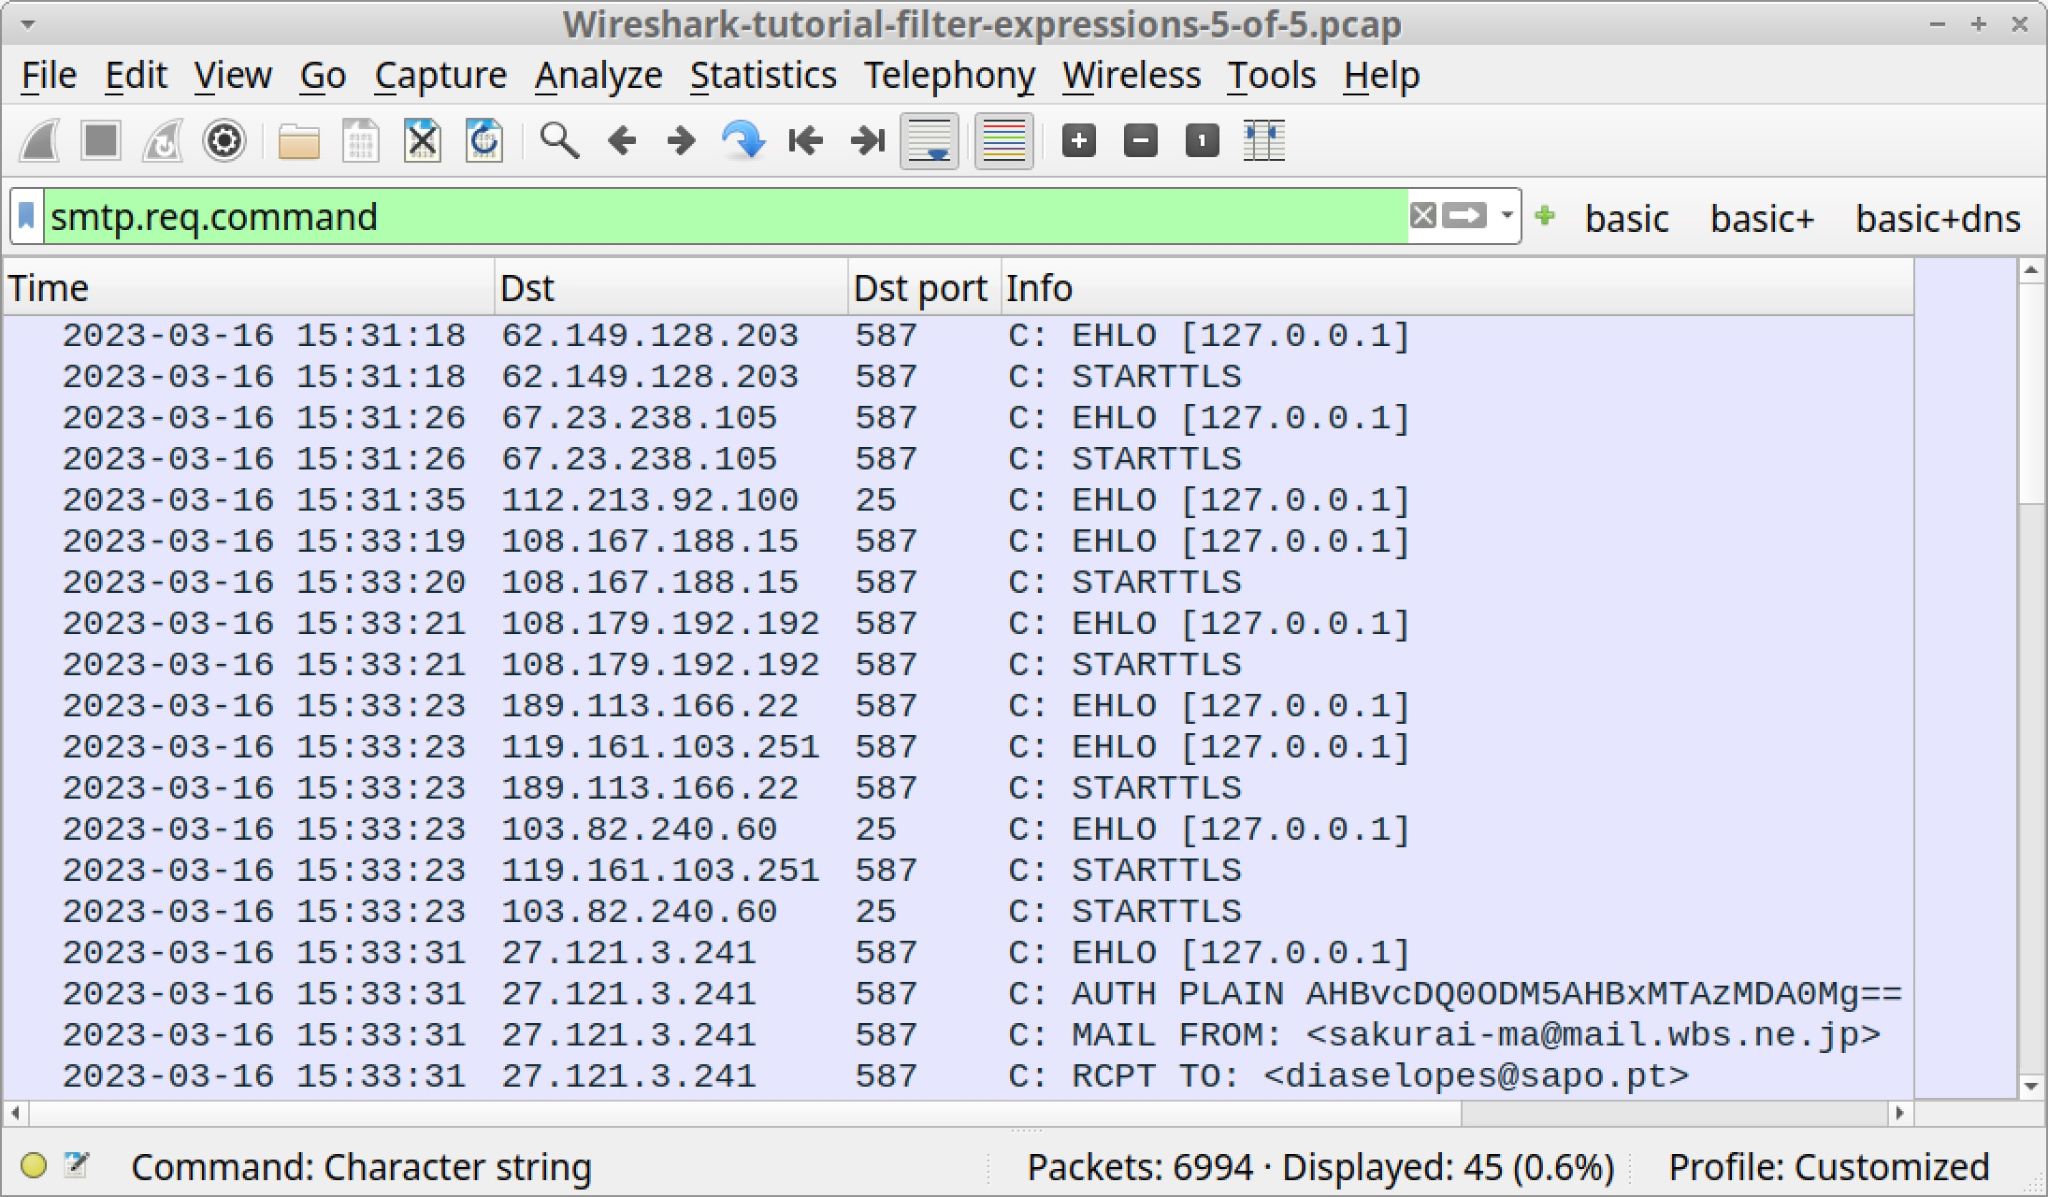 Image 20 is a Wireshark screenshot of the traffic displayed when the filter smtp.req.command is used. 